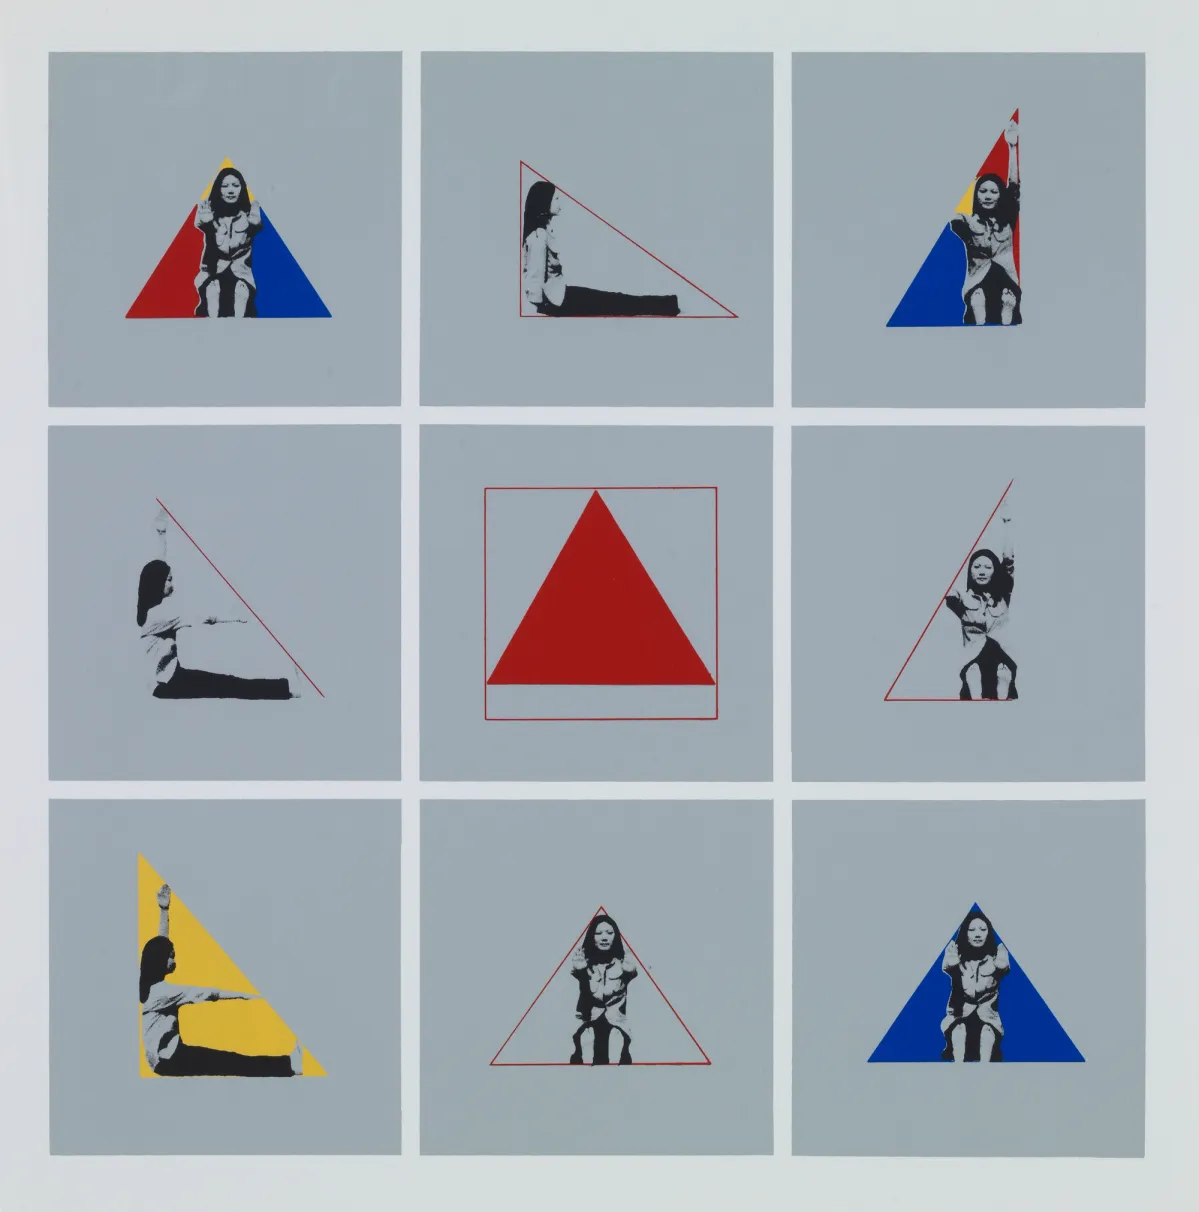 A collage of nine square images with grey backgrounds, each displaying variations of blue, red, and yellow triangles and silhouettes of a person in different poses. The central image stands out with a simple red triangle.